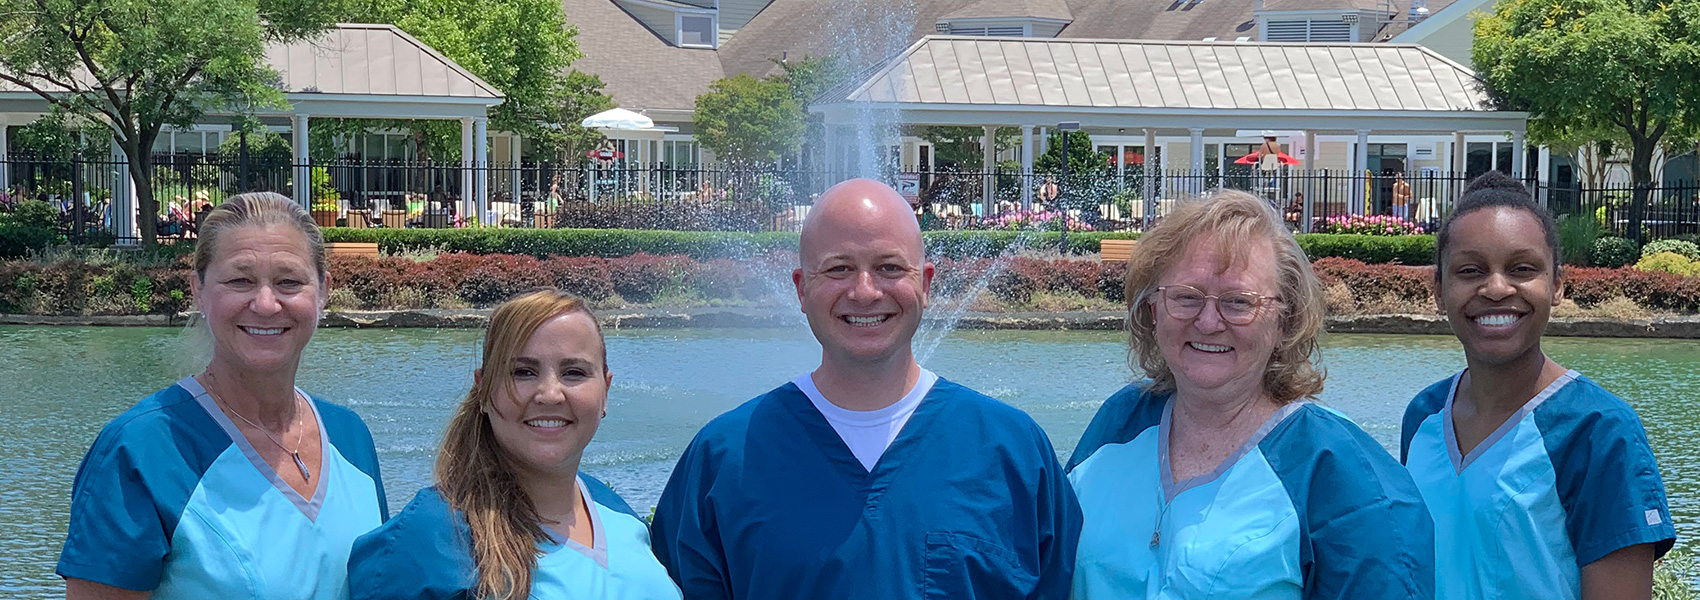 About Us at Piney Orchard Dental